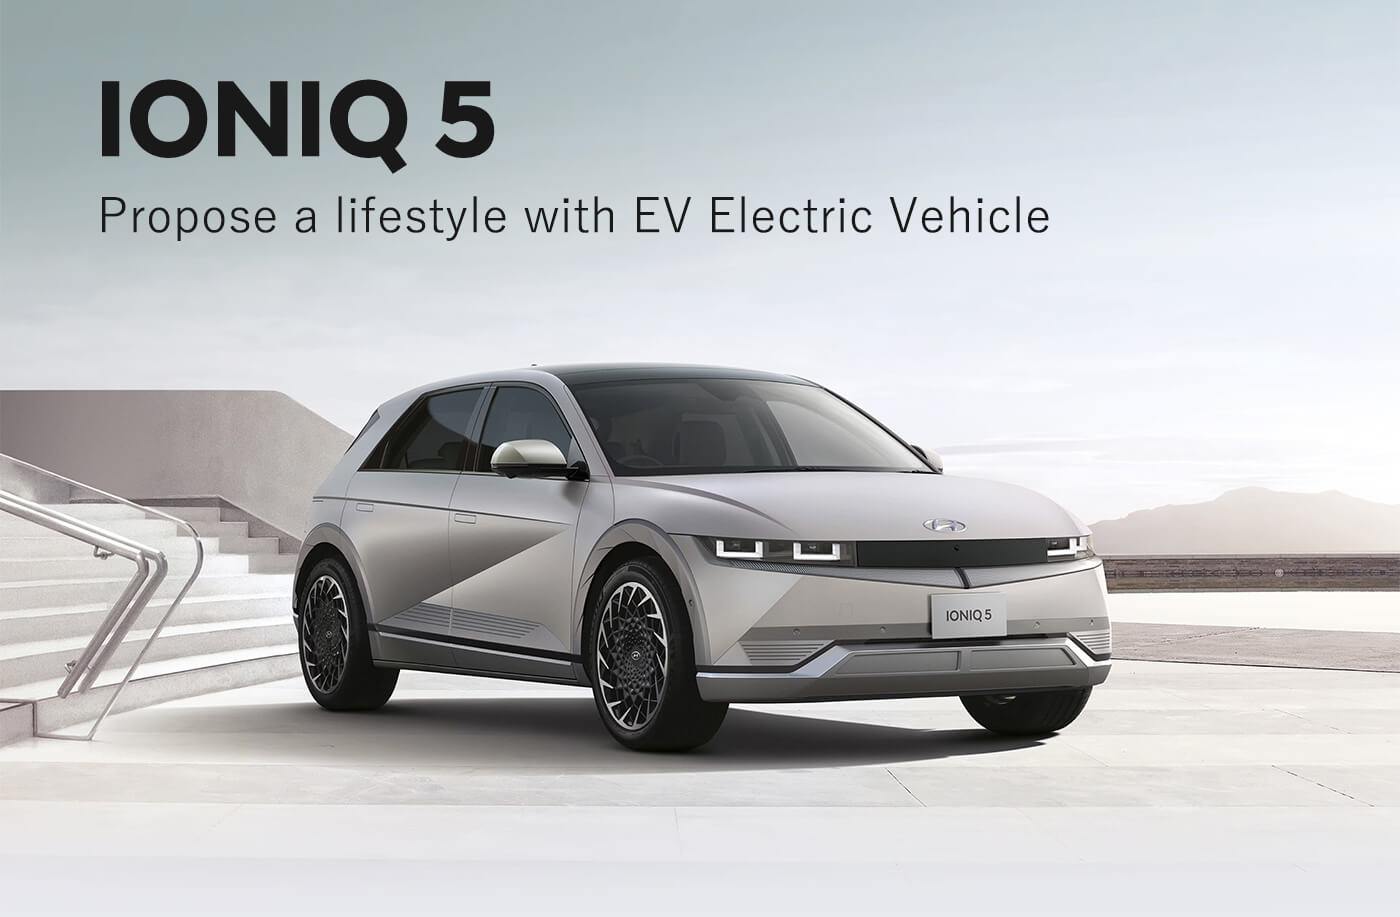 Propose a lifestyle with EV Electric Vehicle